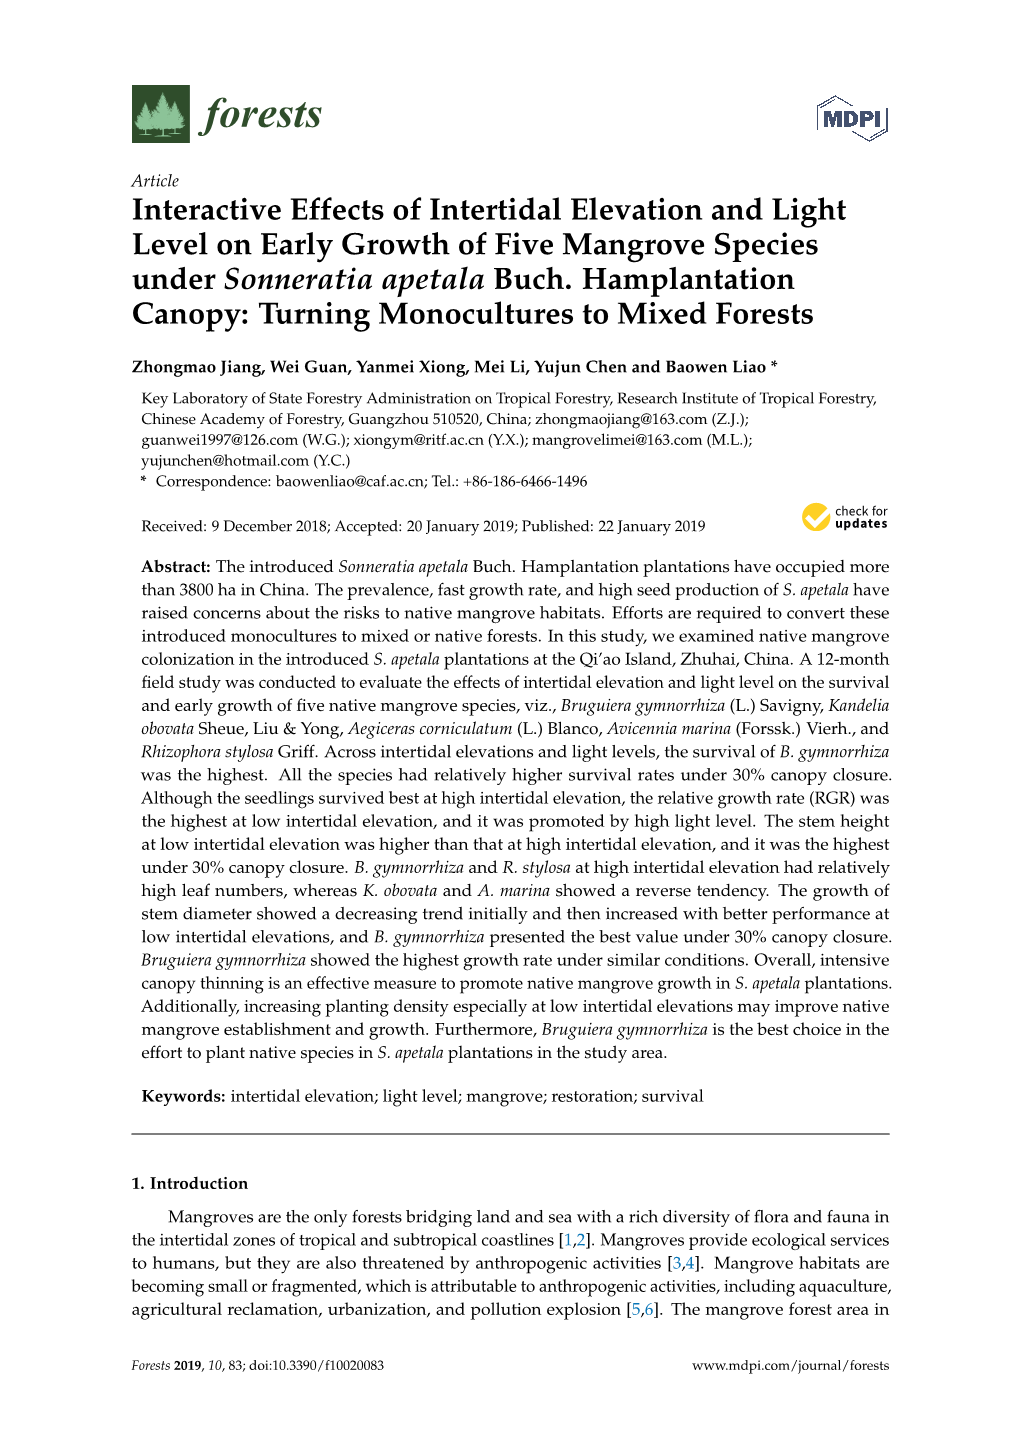 Interactive Effects of Intertidal Elevation and Light Level on Early Growth of Five Mangrove Species Under Sonneratia Apetala Buch